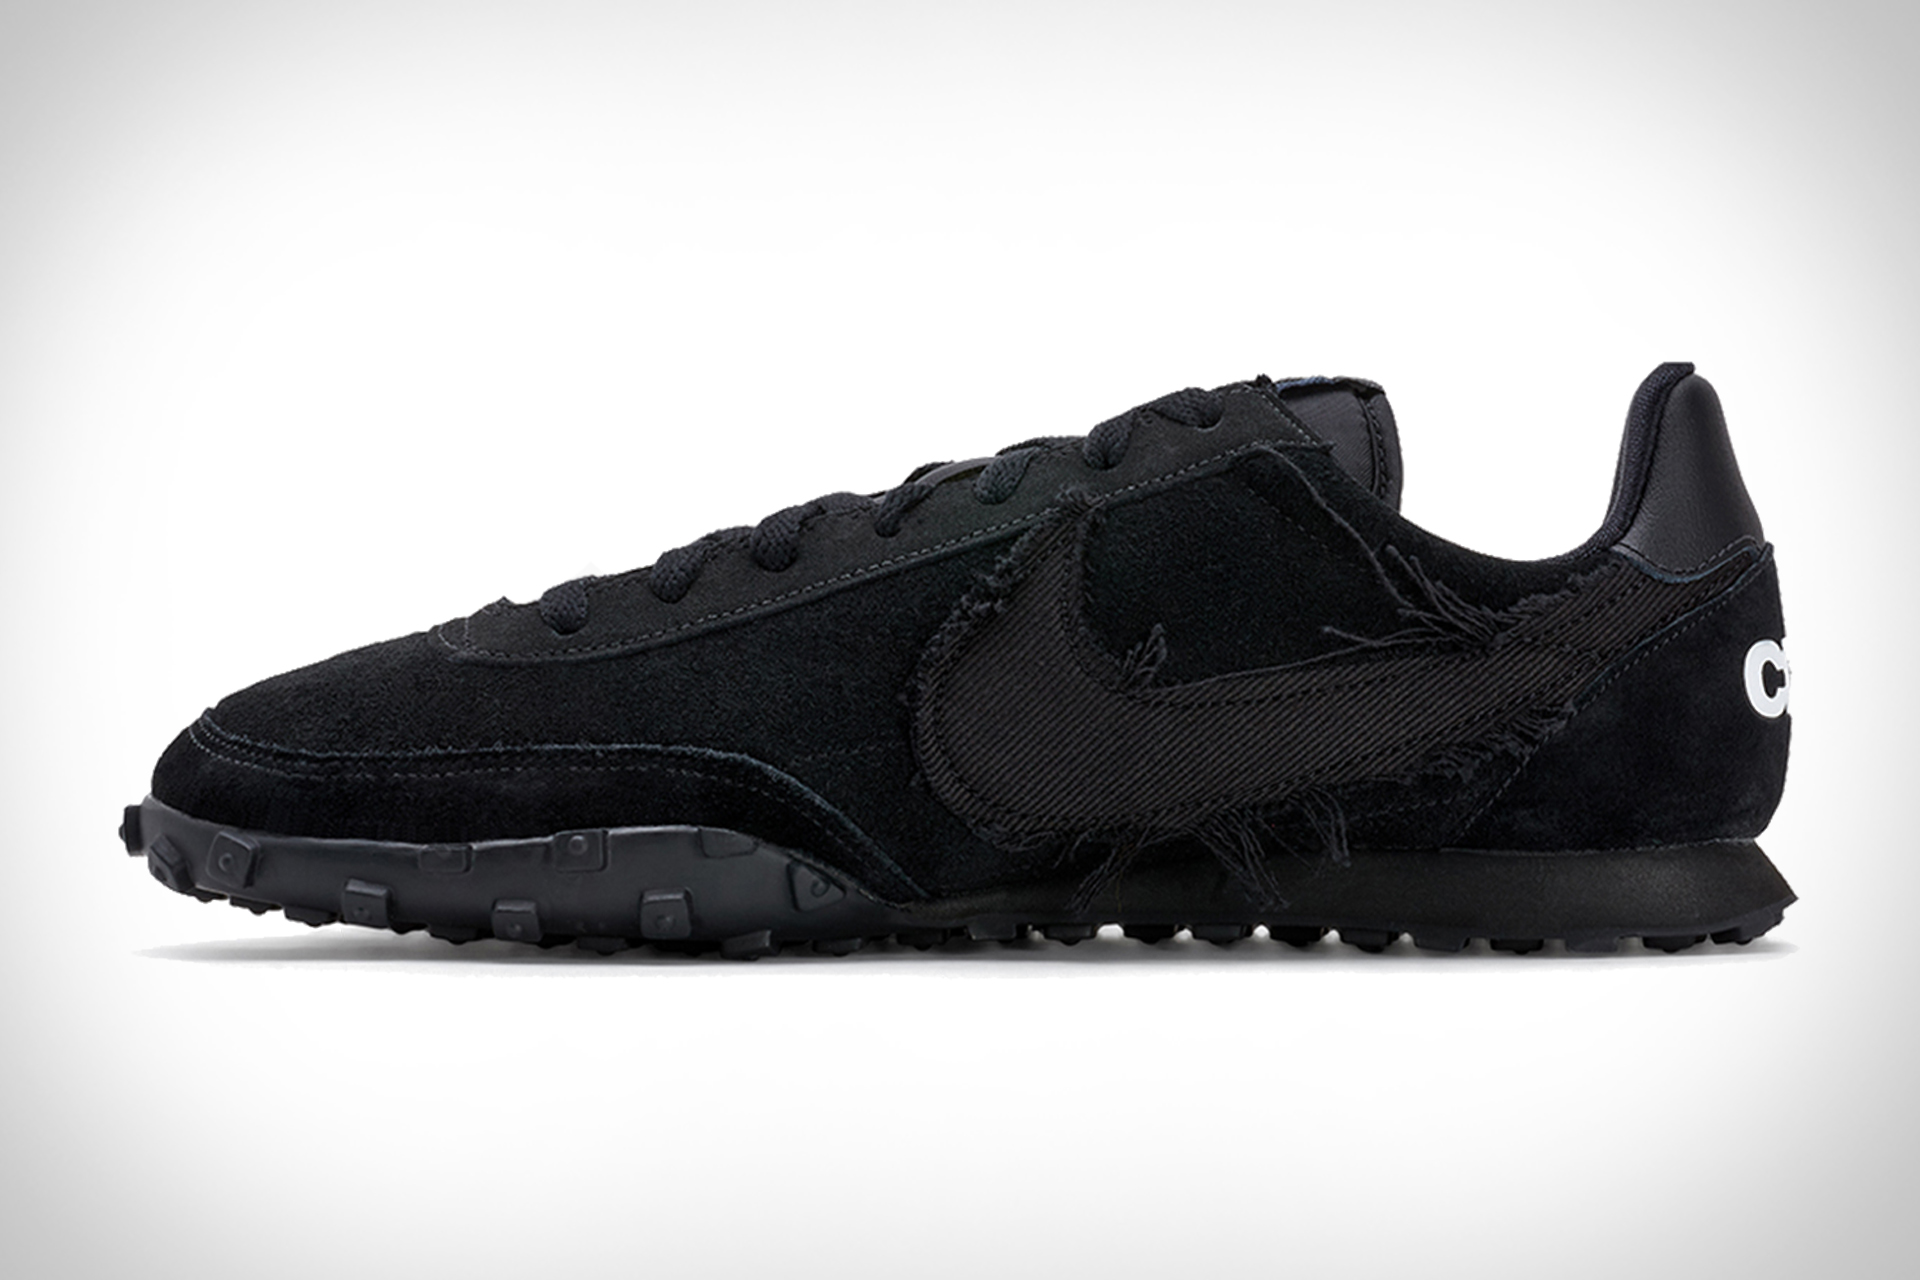 Nike x Comme des Garcons Waffle Racer 2 